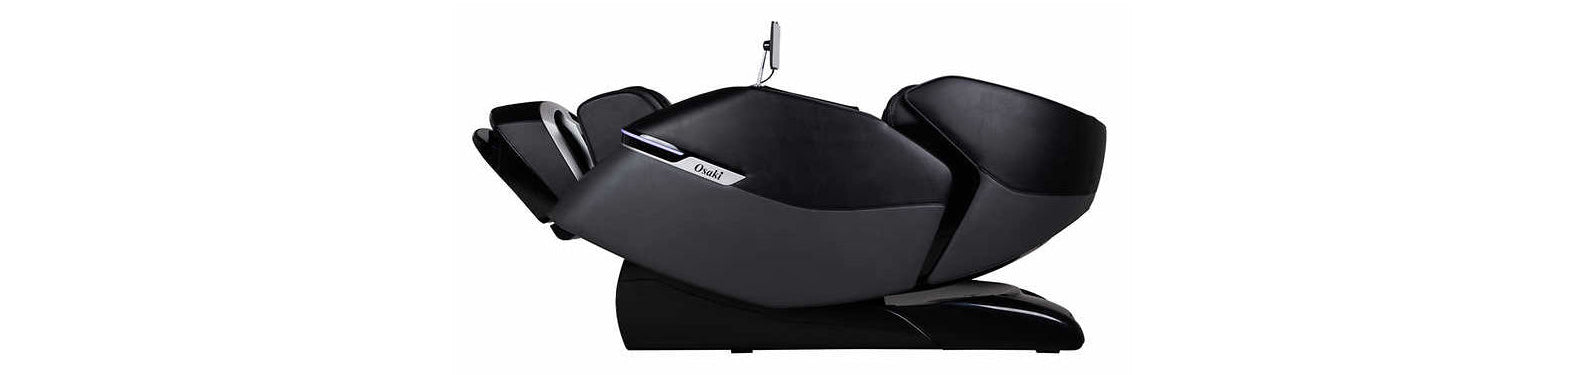 Zero gravity massage chairs deliver a luxurious relaxation experience, utilizing a unique position that aligns your legs above your heart, simulating weightlessness and optimizing the effectiveness of its comprehensive massage techniques.